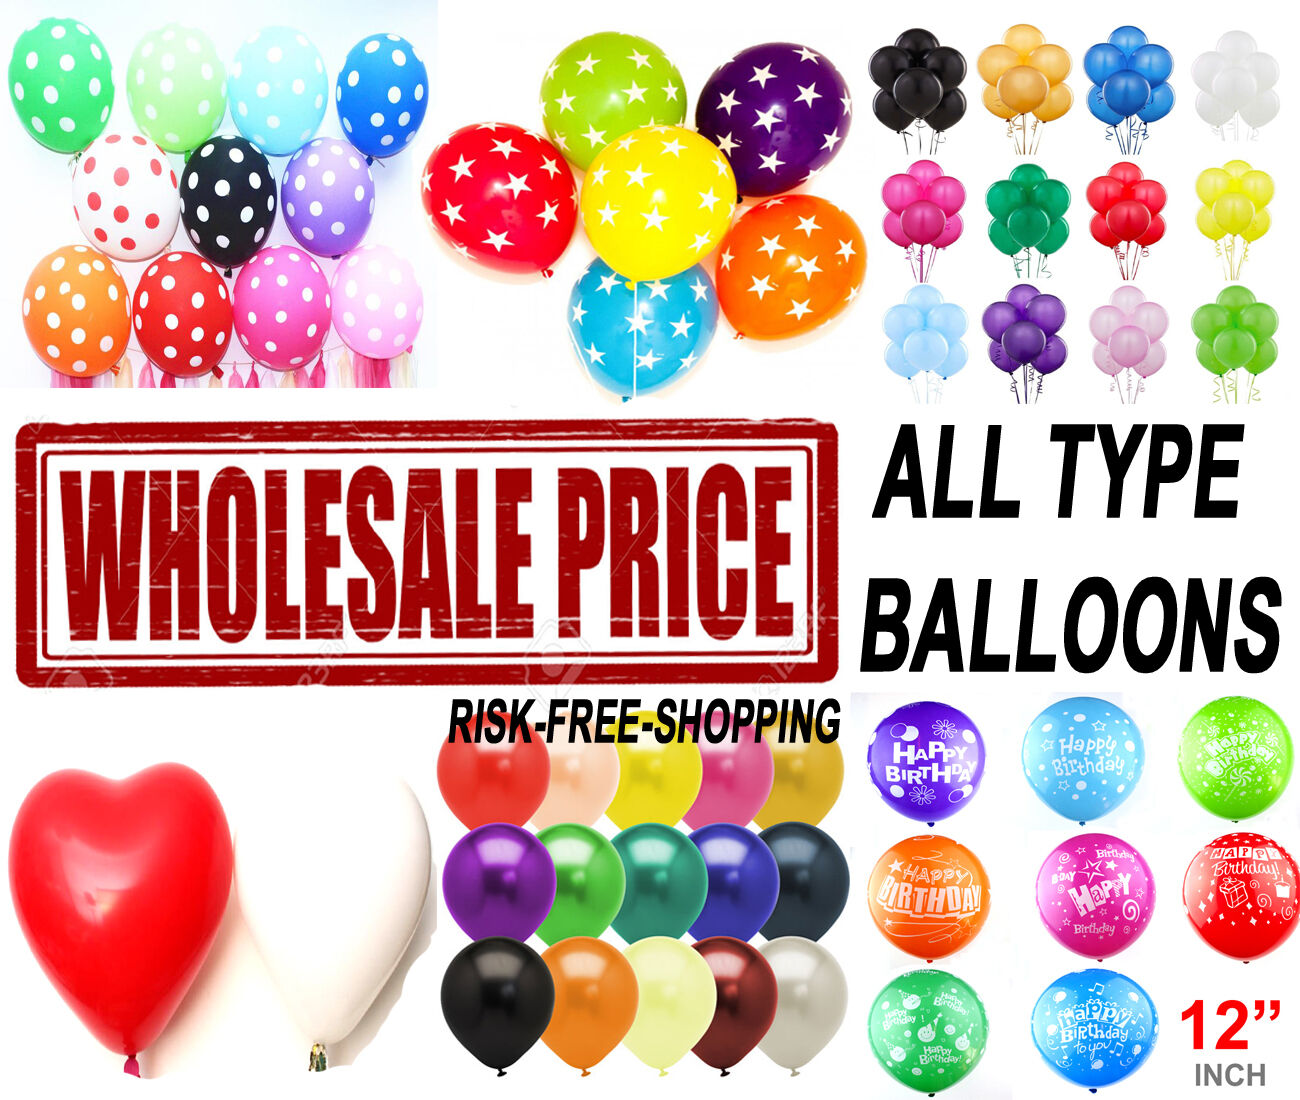 lied residentie tafel WHOLESALE BALLOONS 100-5000 Latex BULK PRICE JOBLOT Quality Any Occasion  BALLONS | eBay